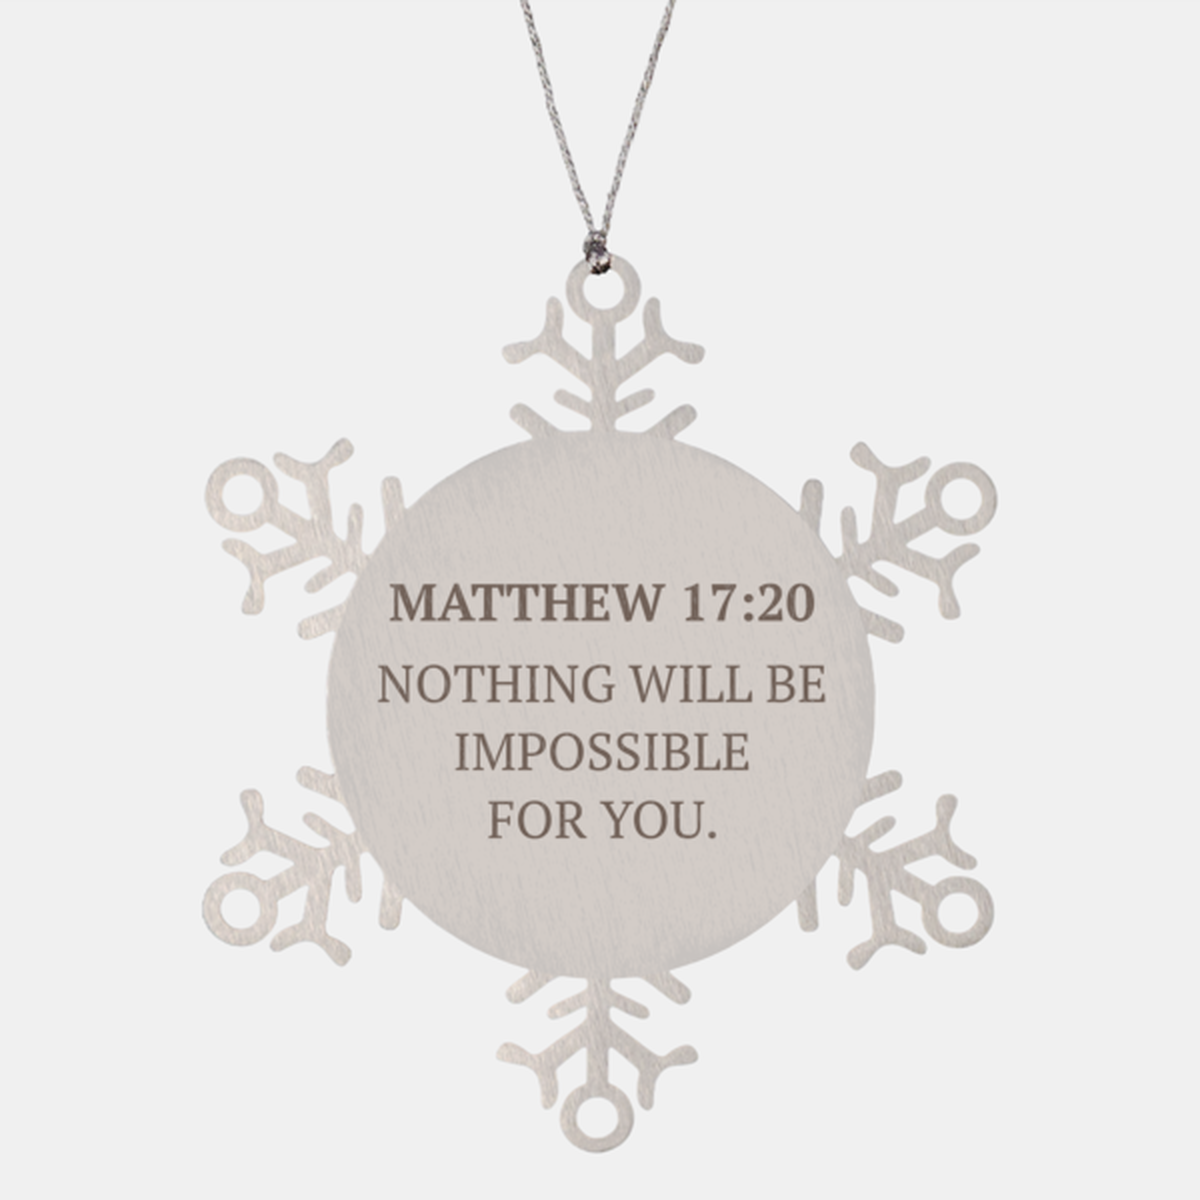 Christian Ornaments For Christmas Tree, Nothing Will Be Impossible For You, Religious Christmas Decorations, Scripture Ornaments Gifts, Bible Verse Ornament